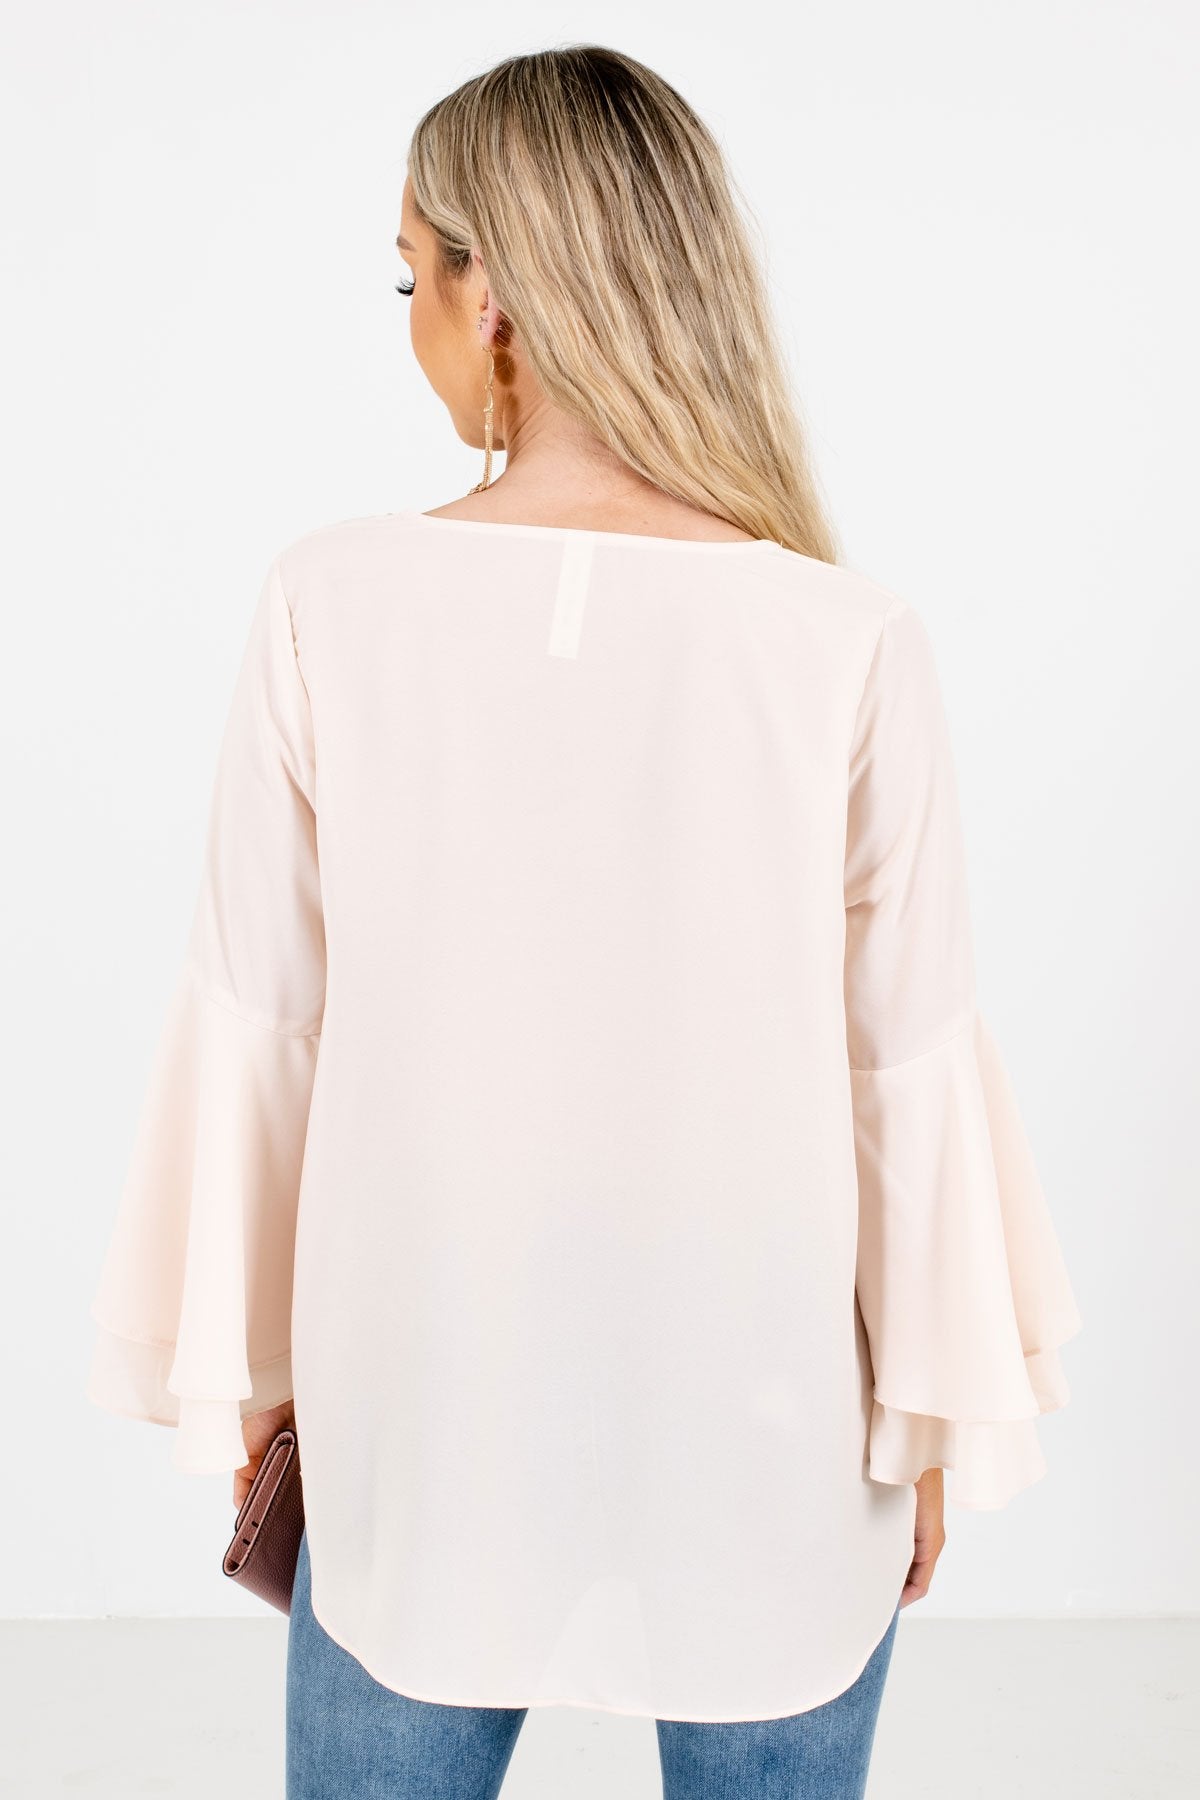 Women's Cream Bell Sleeve Boutique Blouses